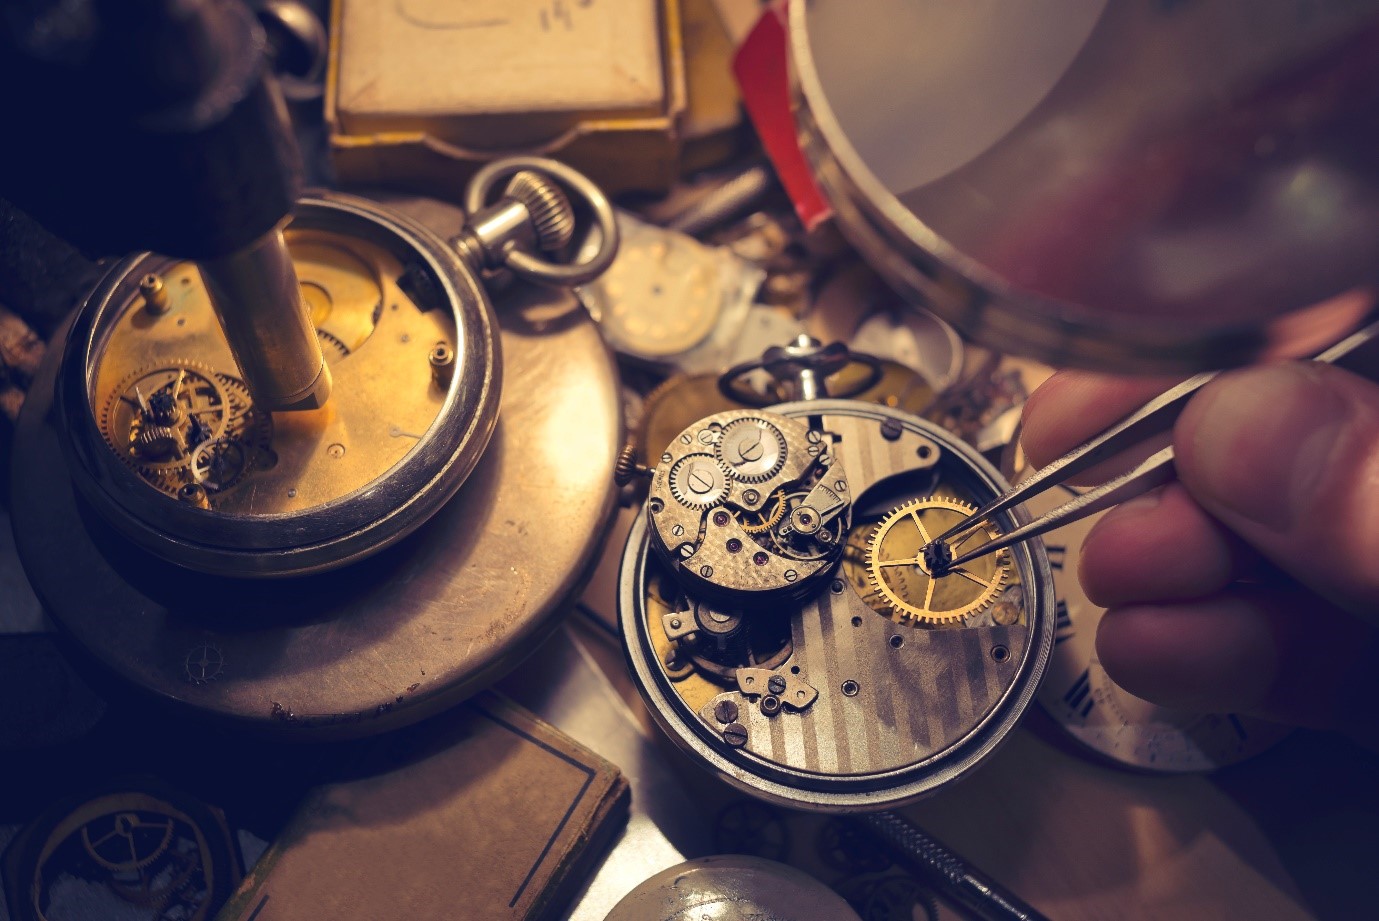 Chronicles of Timepieces: Exploring the Fascinating History of Watches